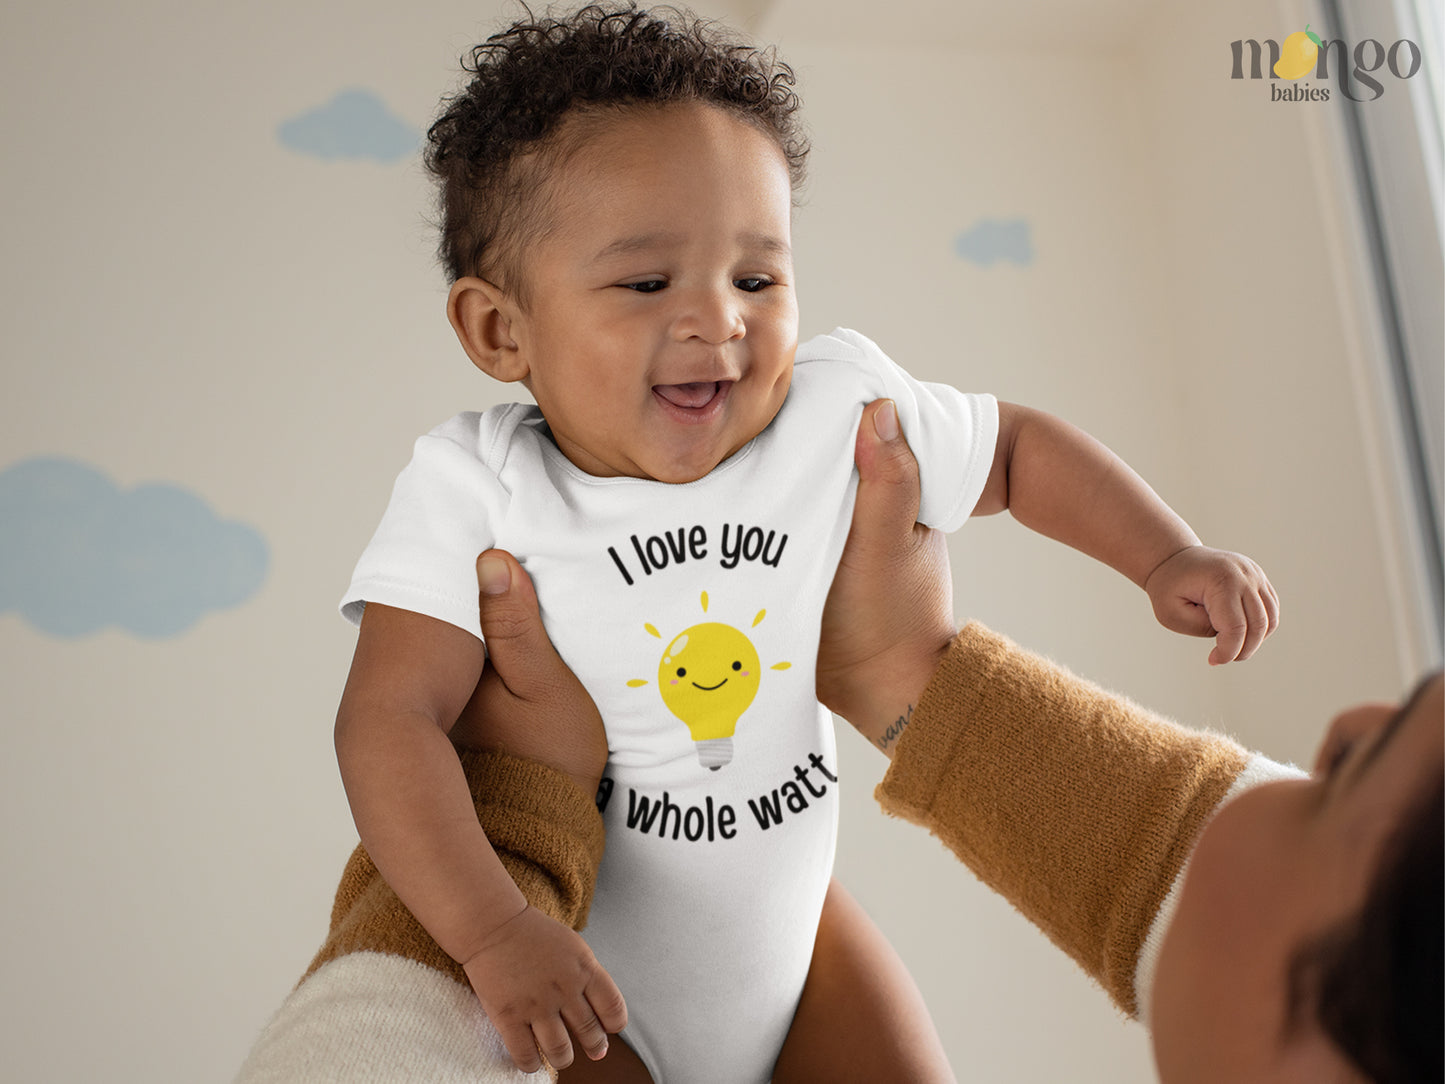 White Baby Bodysuit showcasing a playful printed graphic of a light bulb and the endearing text 'I love you a whole watt.' Discover this adorable tee that adds a touch of affection and style to your child's wardrobe